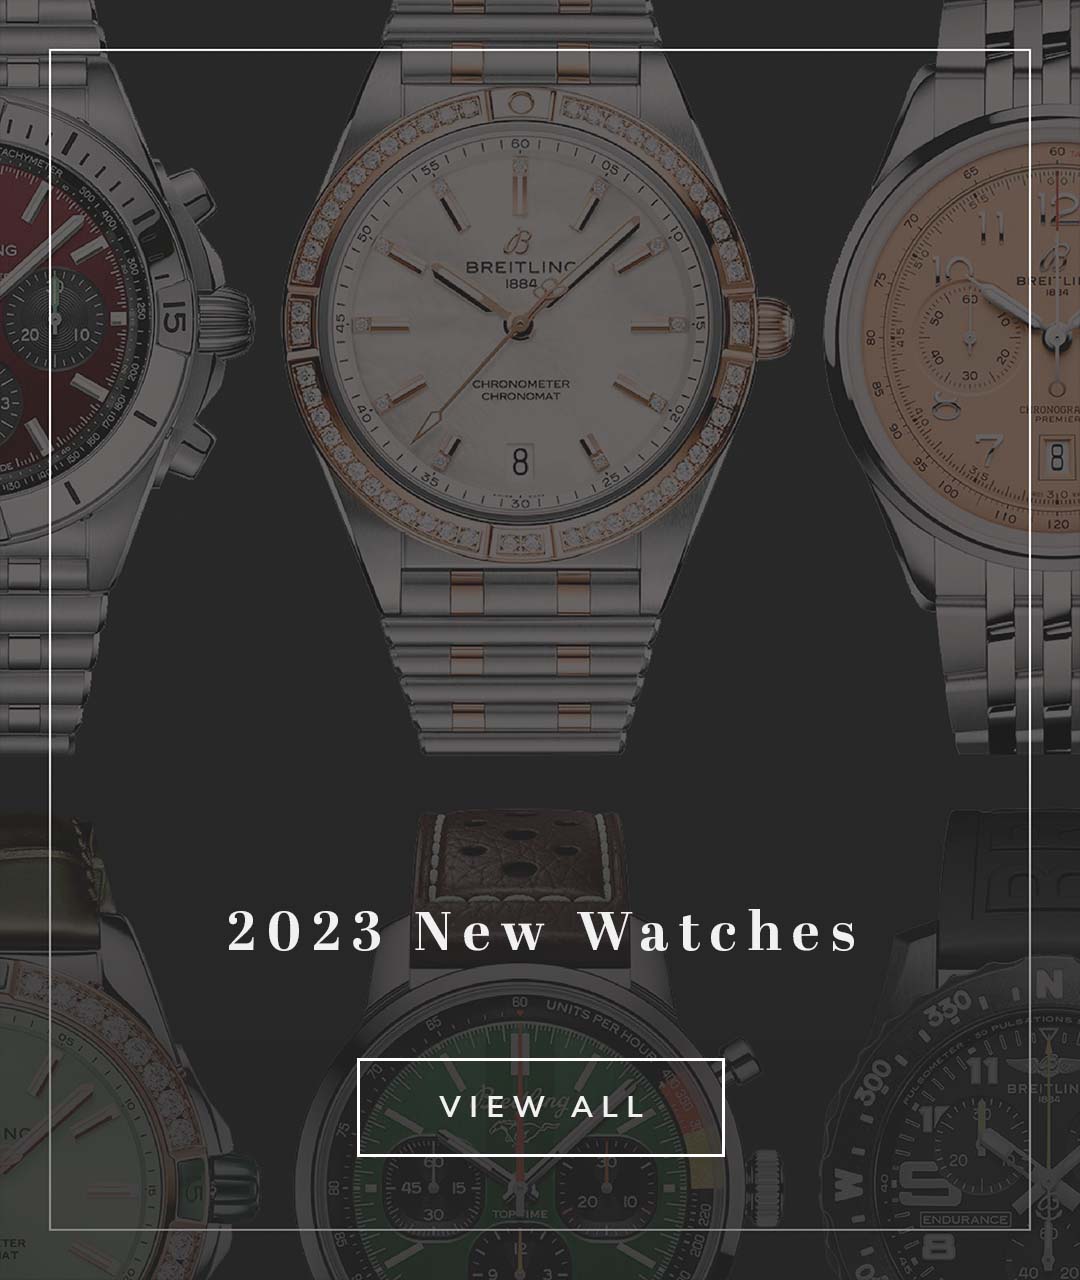 Several Breitling watches with text 2023 new watches shop now